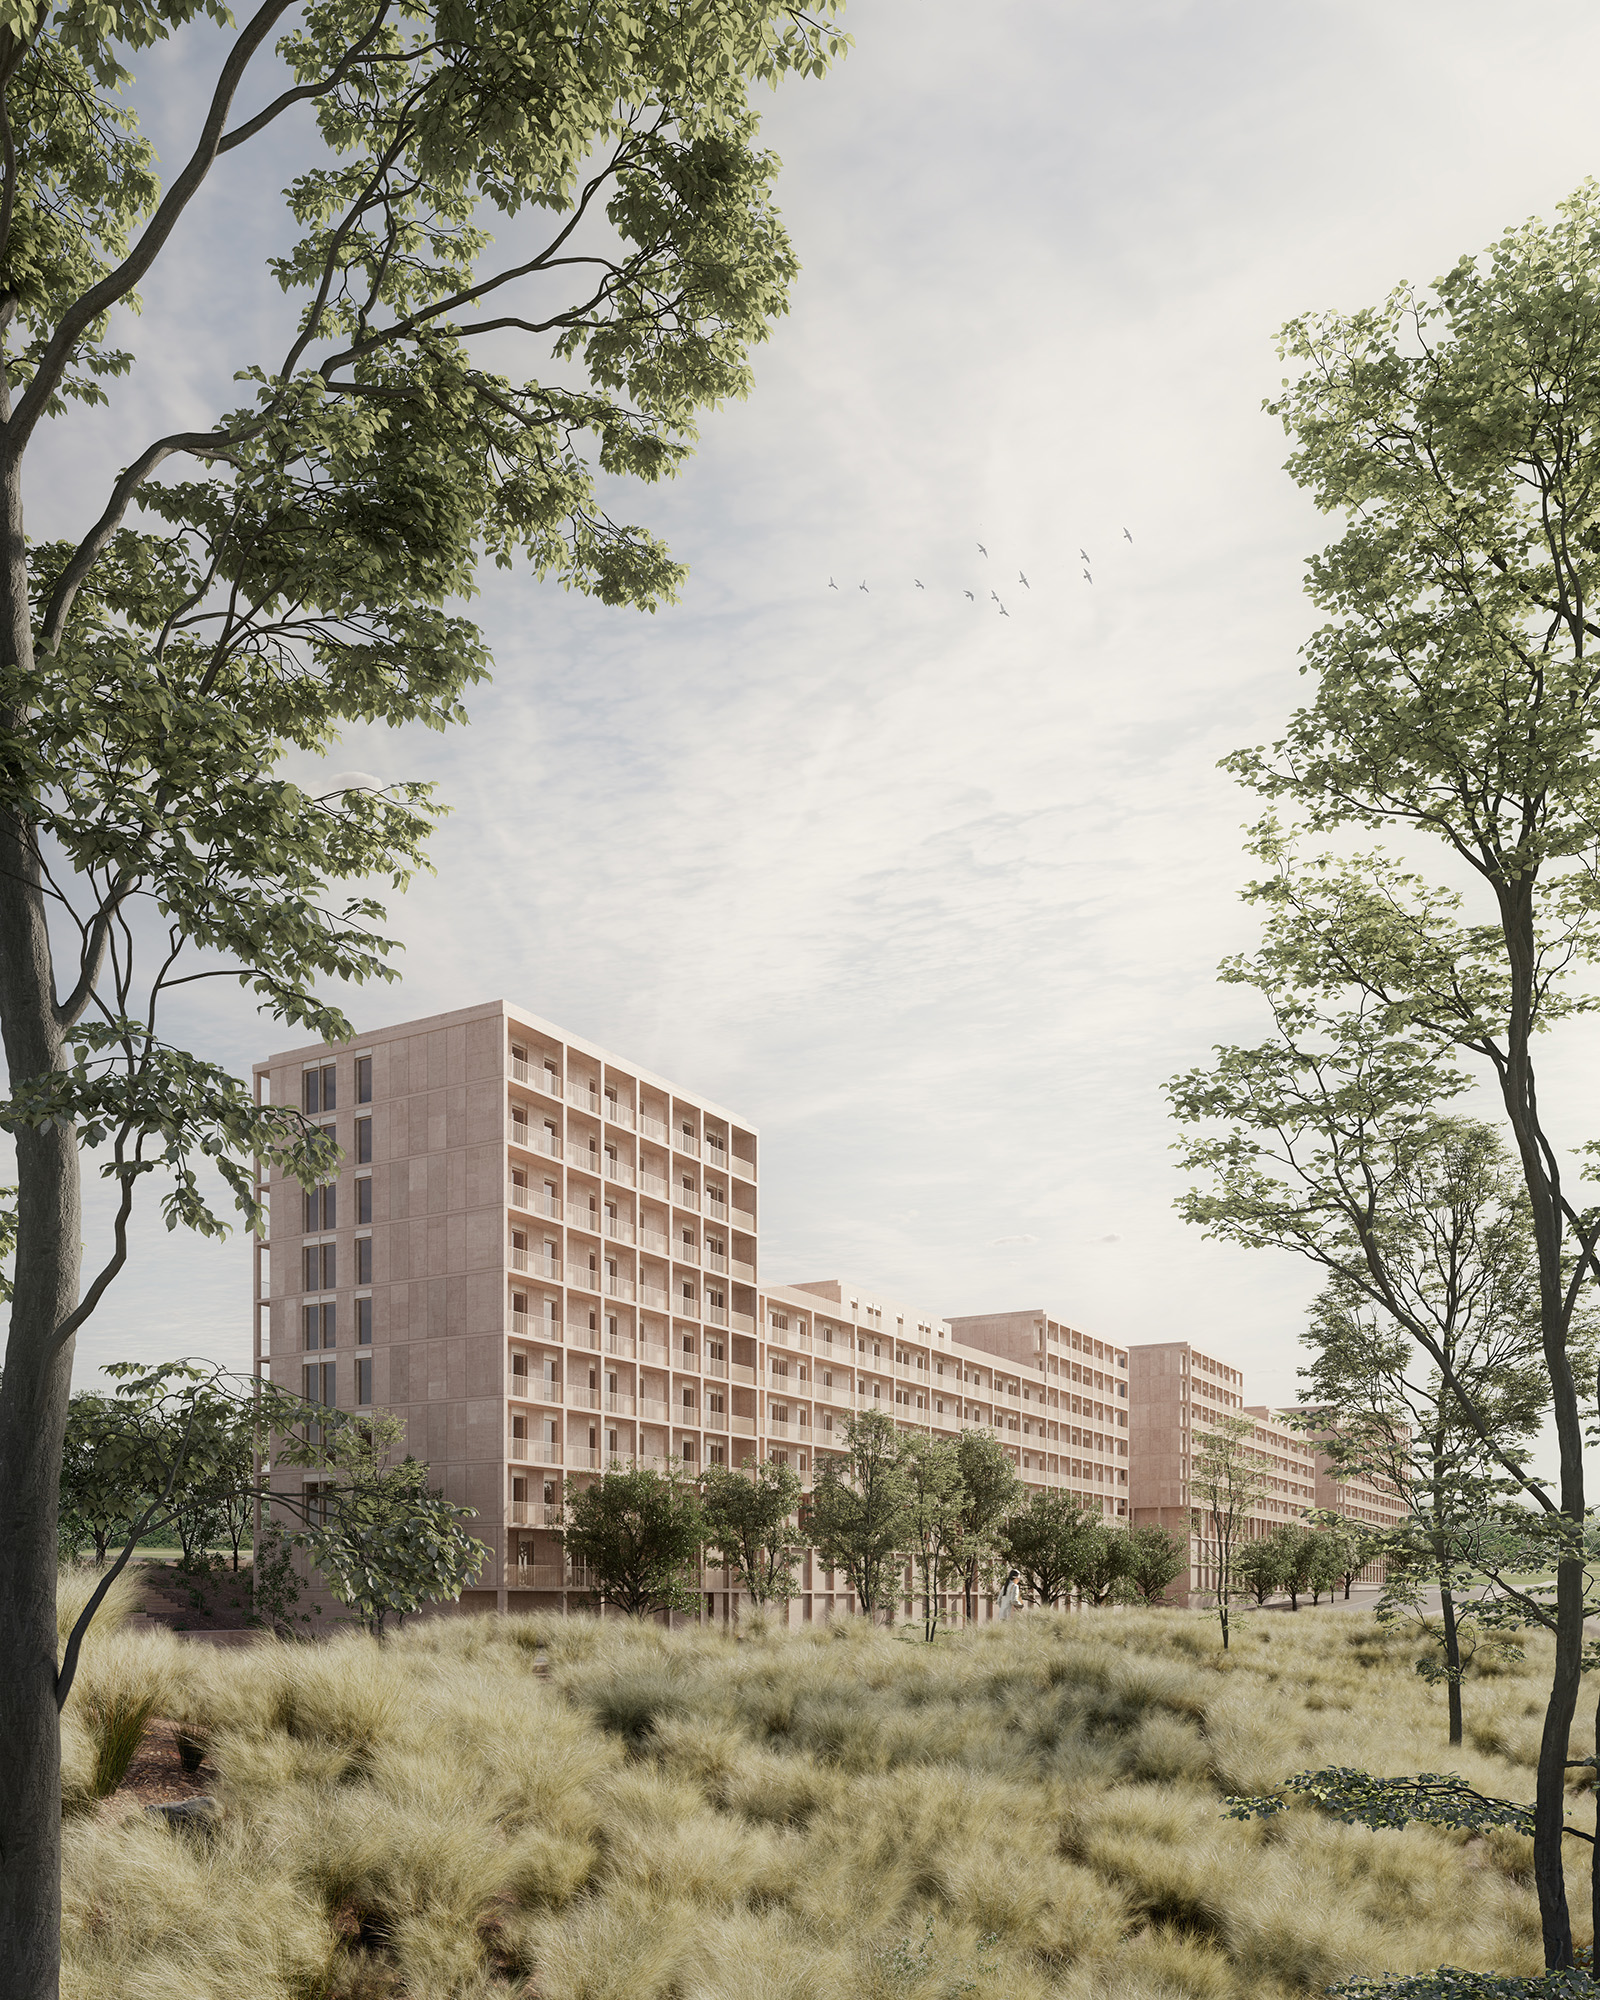 Affordable Housing competition in Almada - 5th place